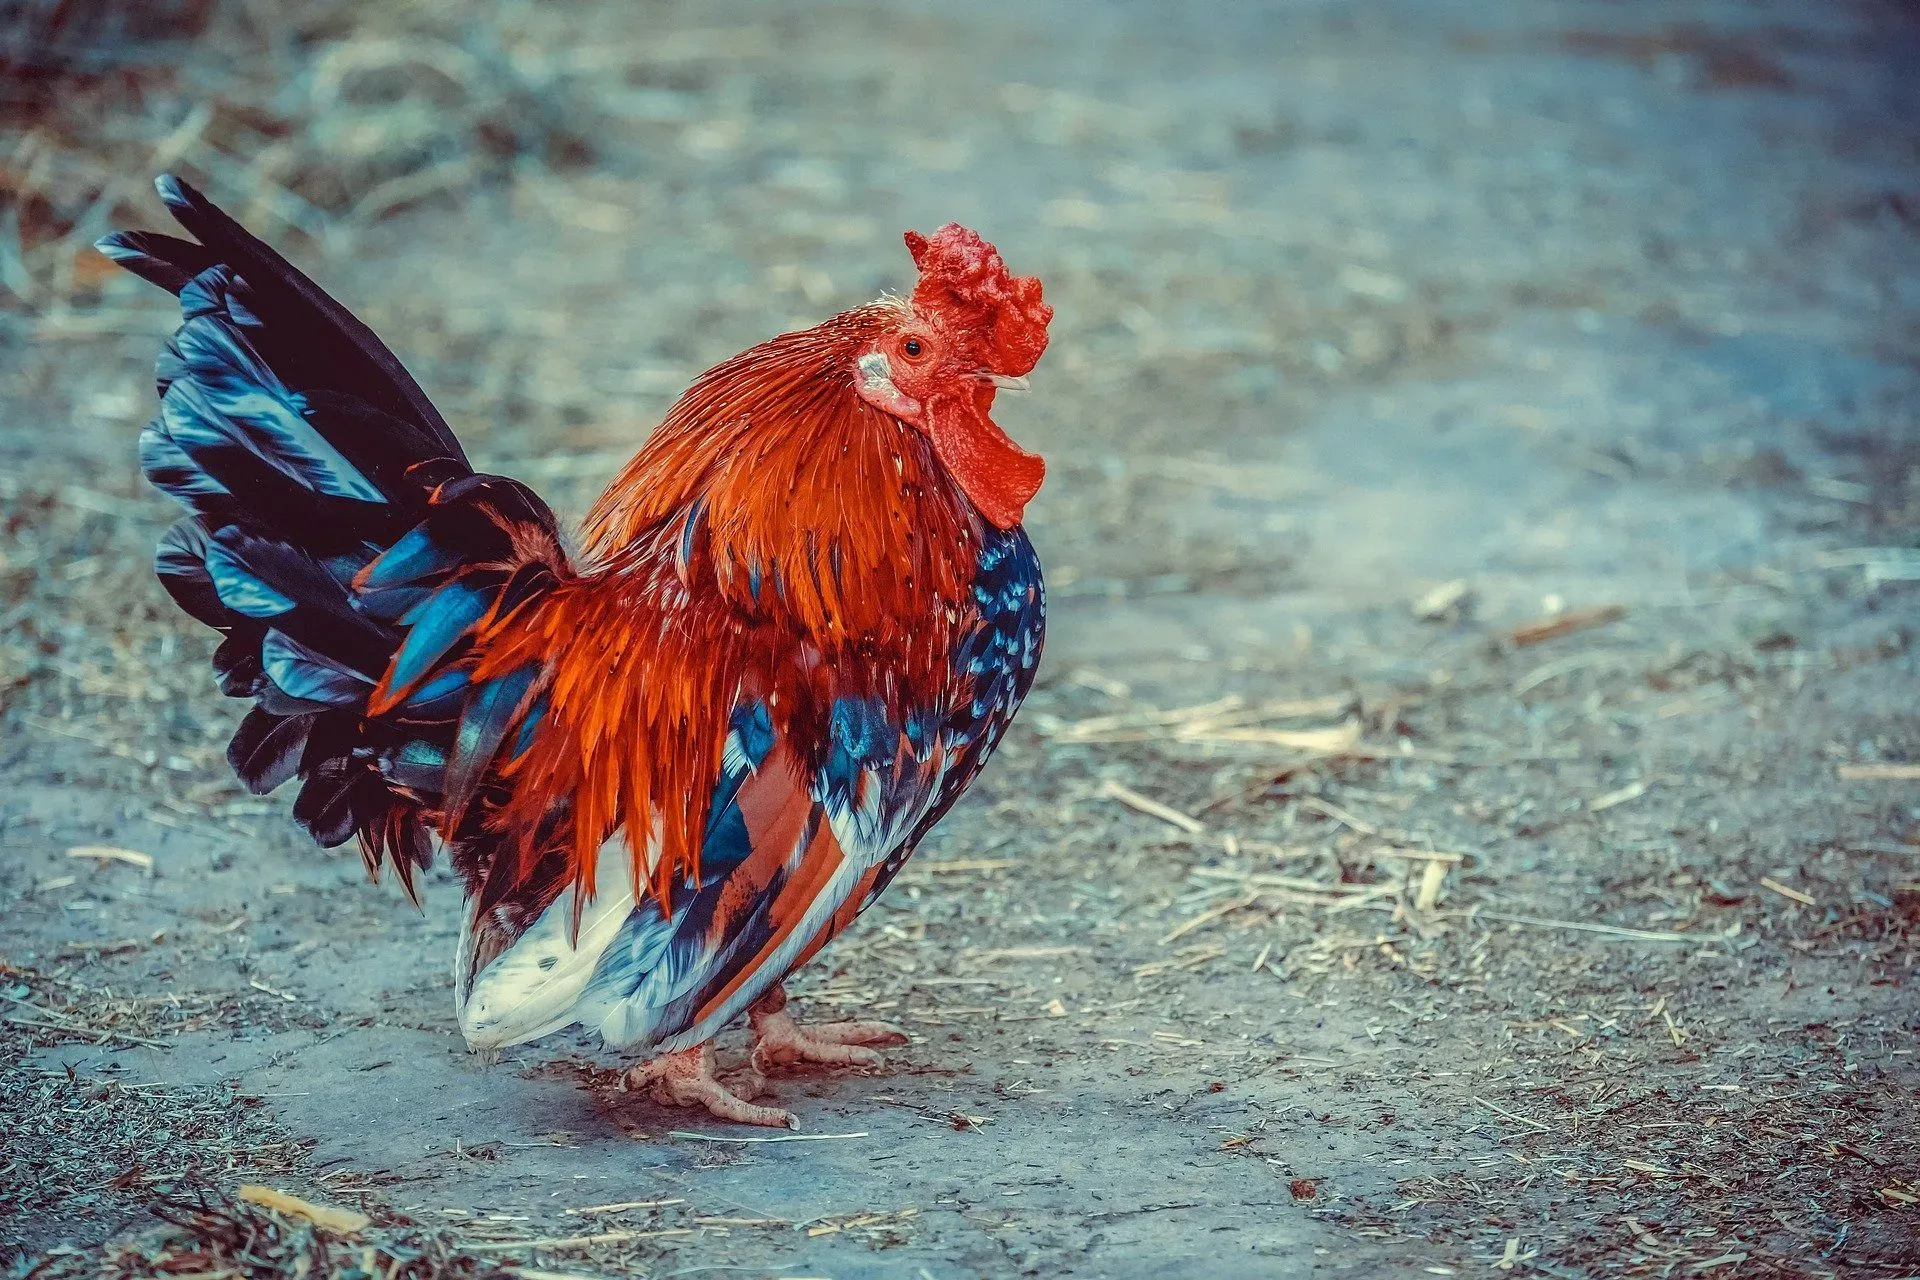 Chickens have the ability to lay eggs but cannot fly as their wings are not fully developed.